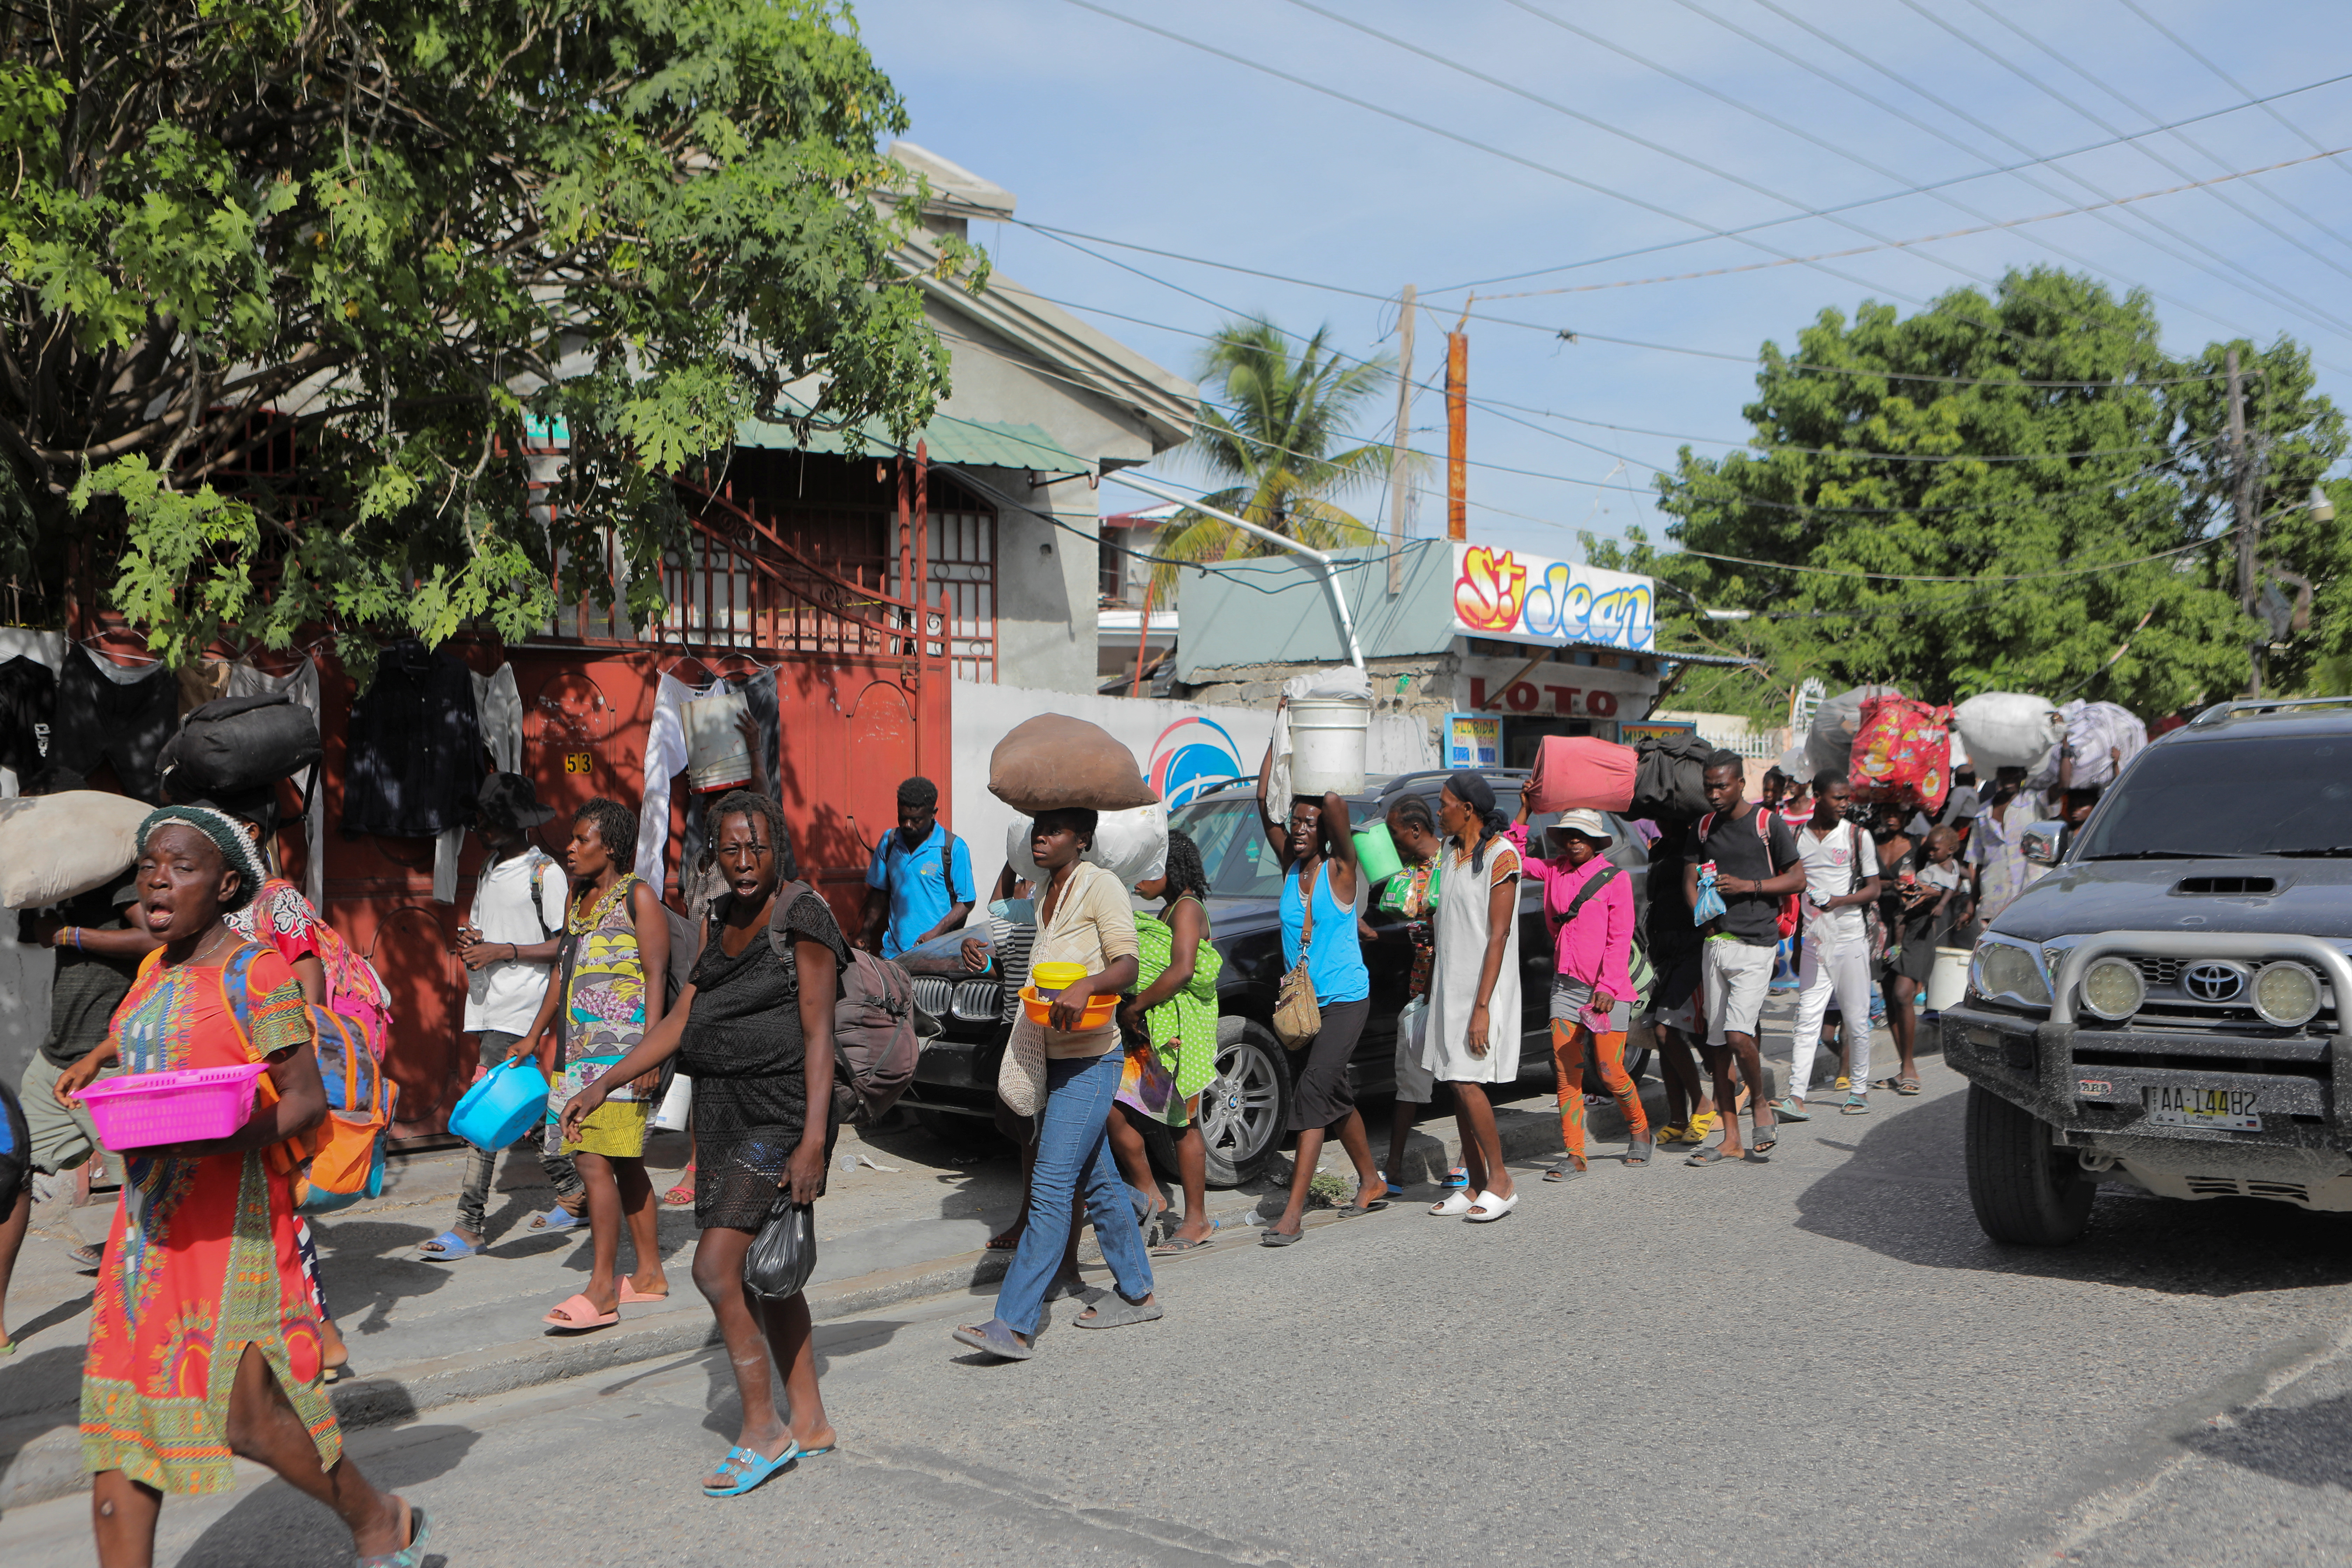 People displaced by gang war violence in Cite Soleil on the streets of Delmas neighborhood in Port-au-Prince